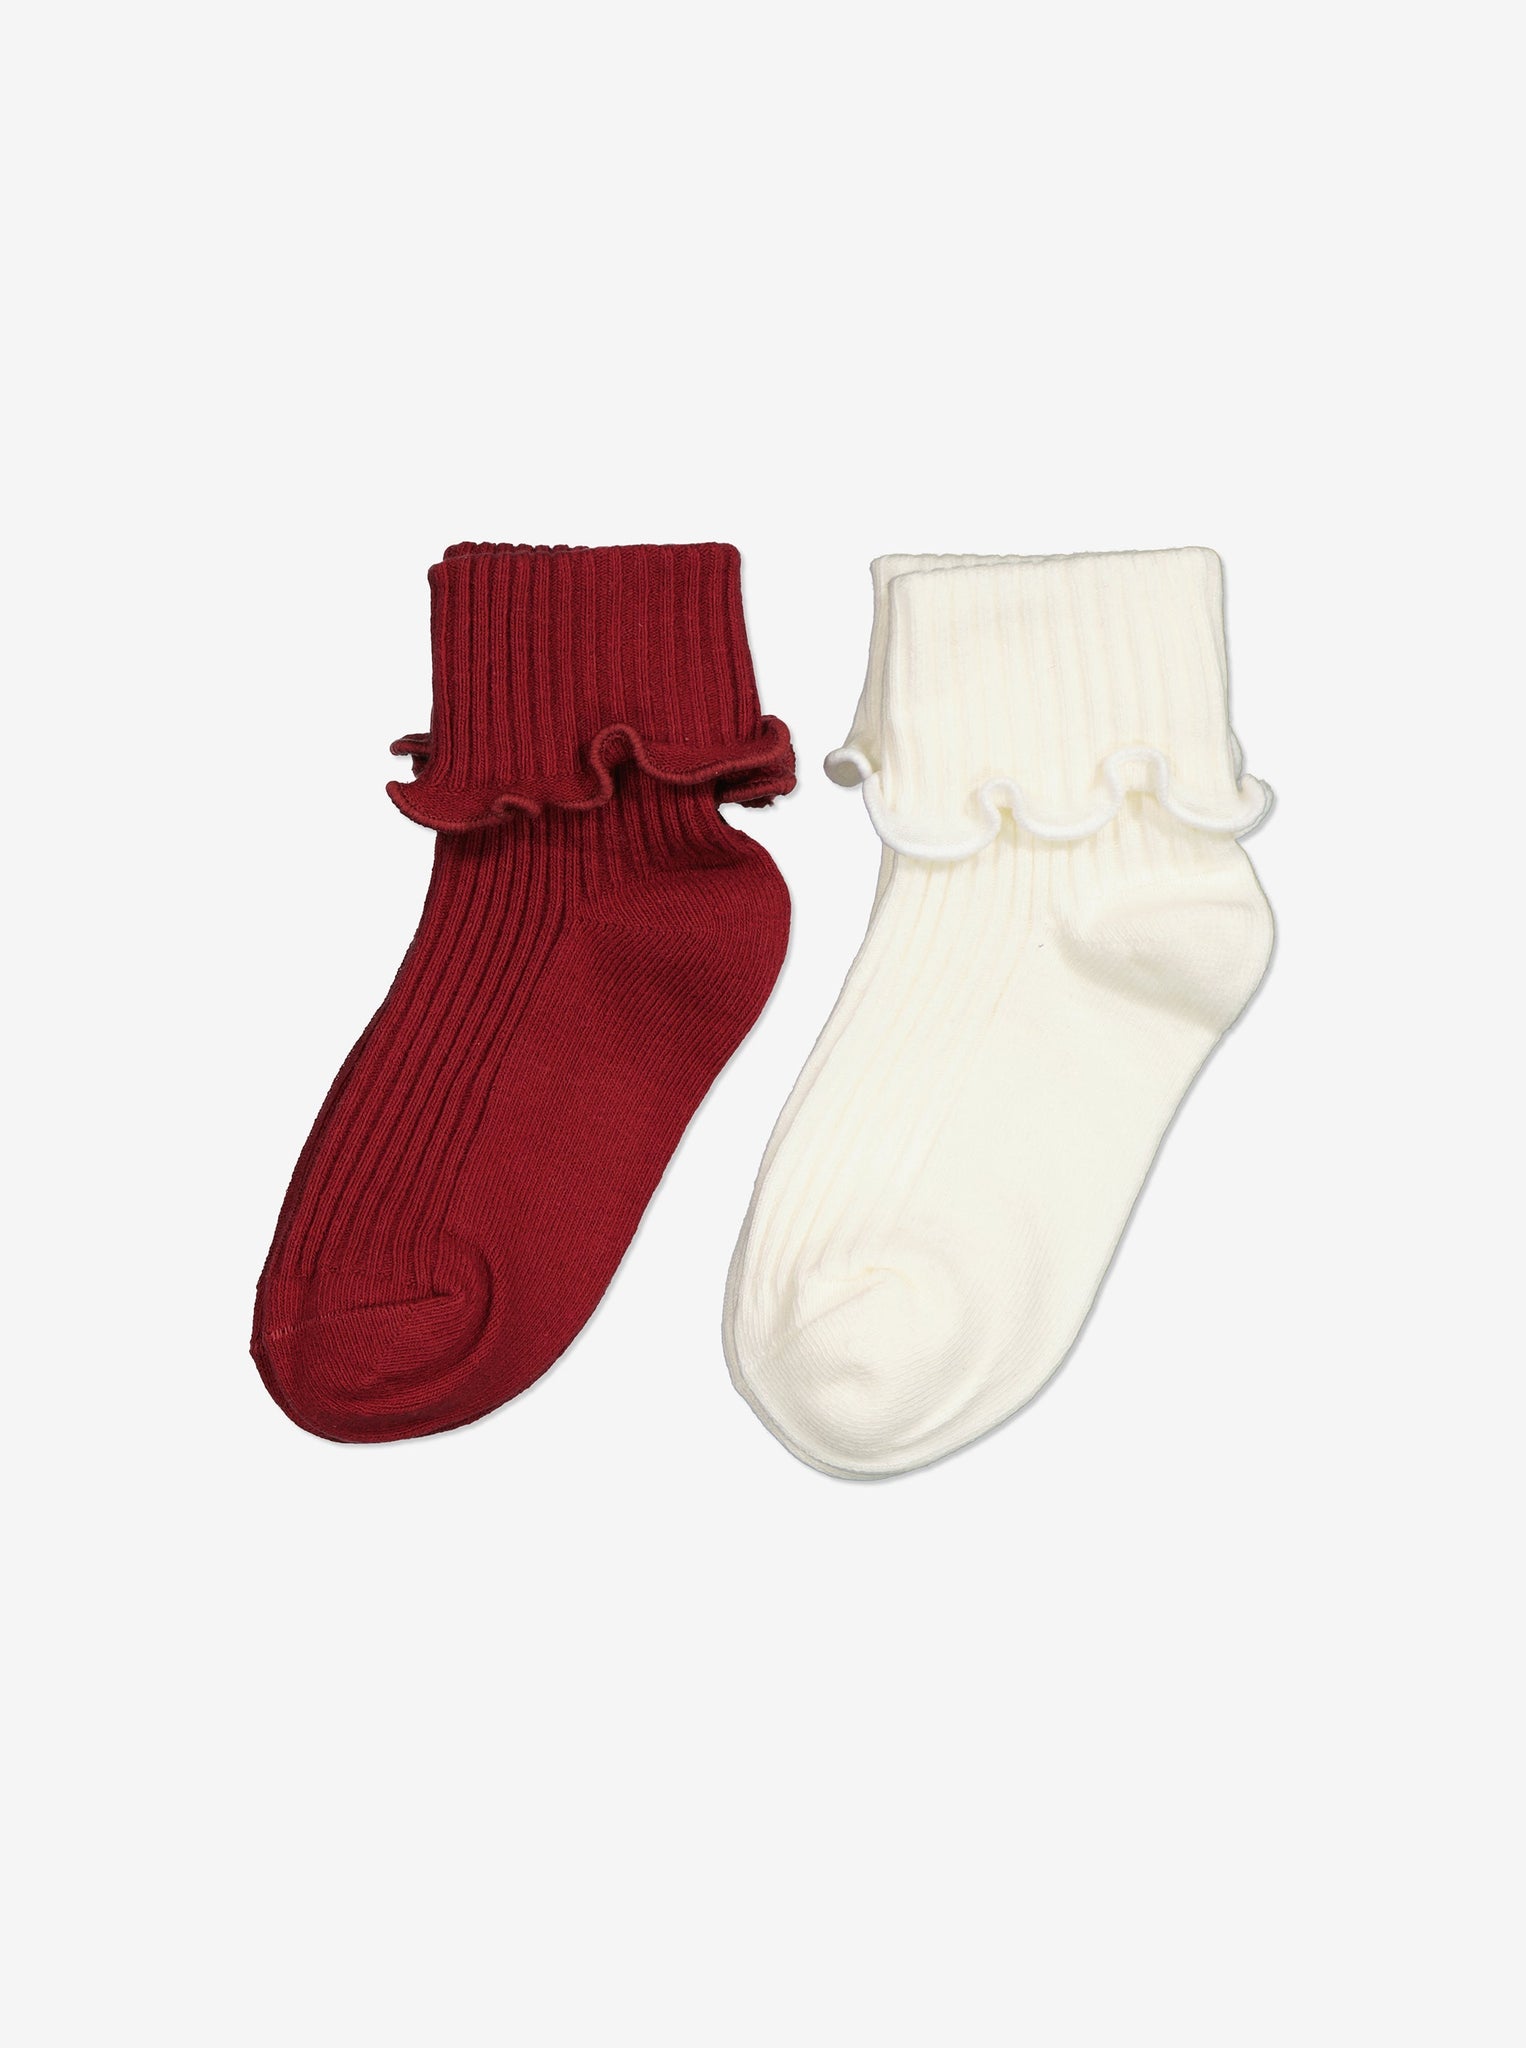 Red & White Baby Socks Multipack from the Polarn O. Pyret babywear collection. Clothes made using sustainably sourced materials.